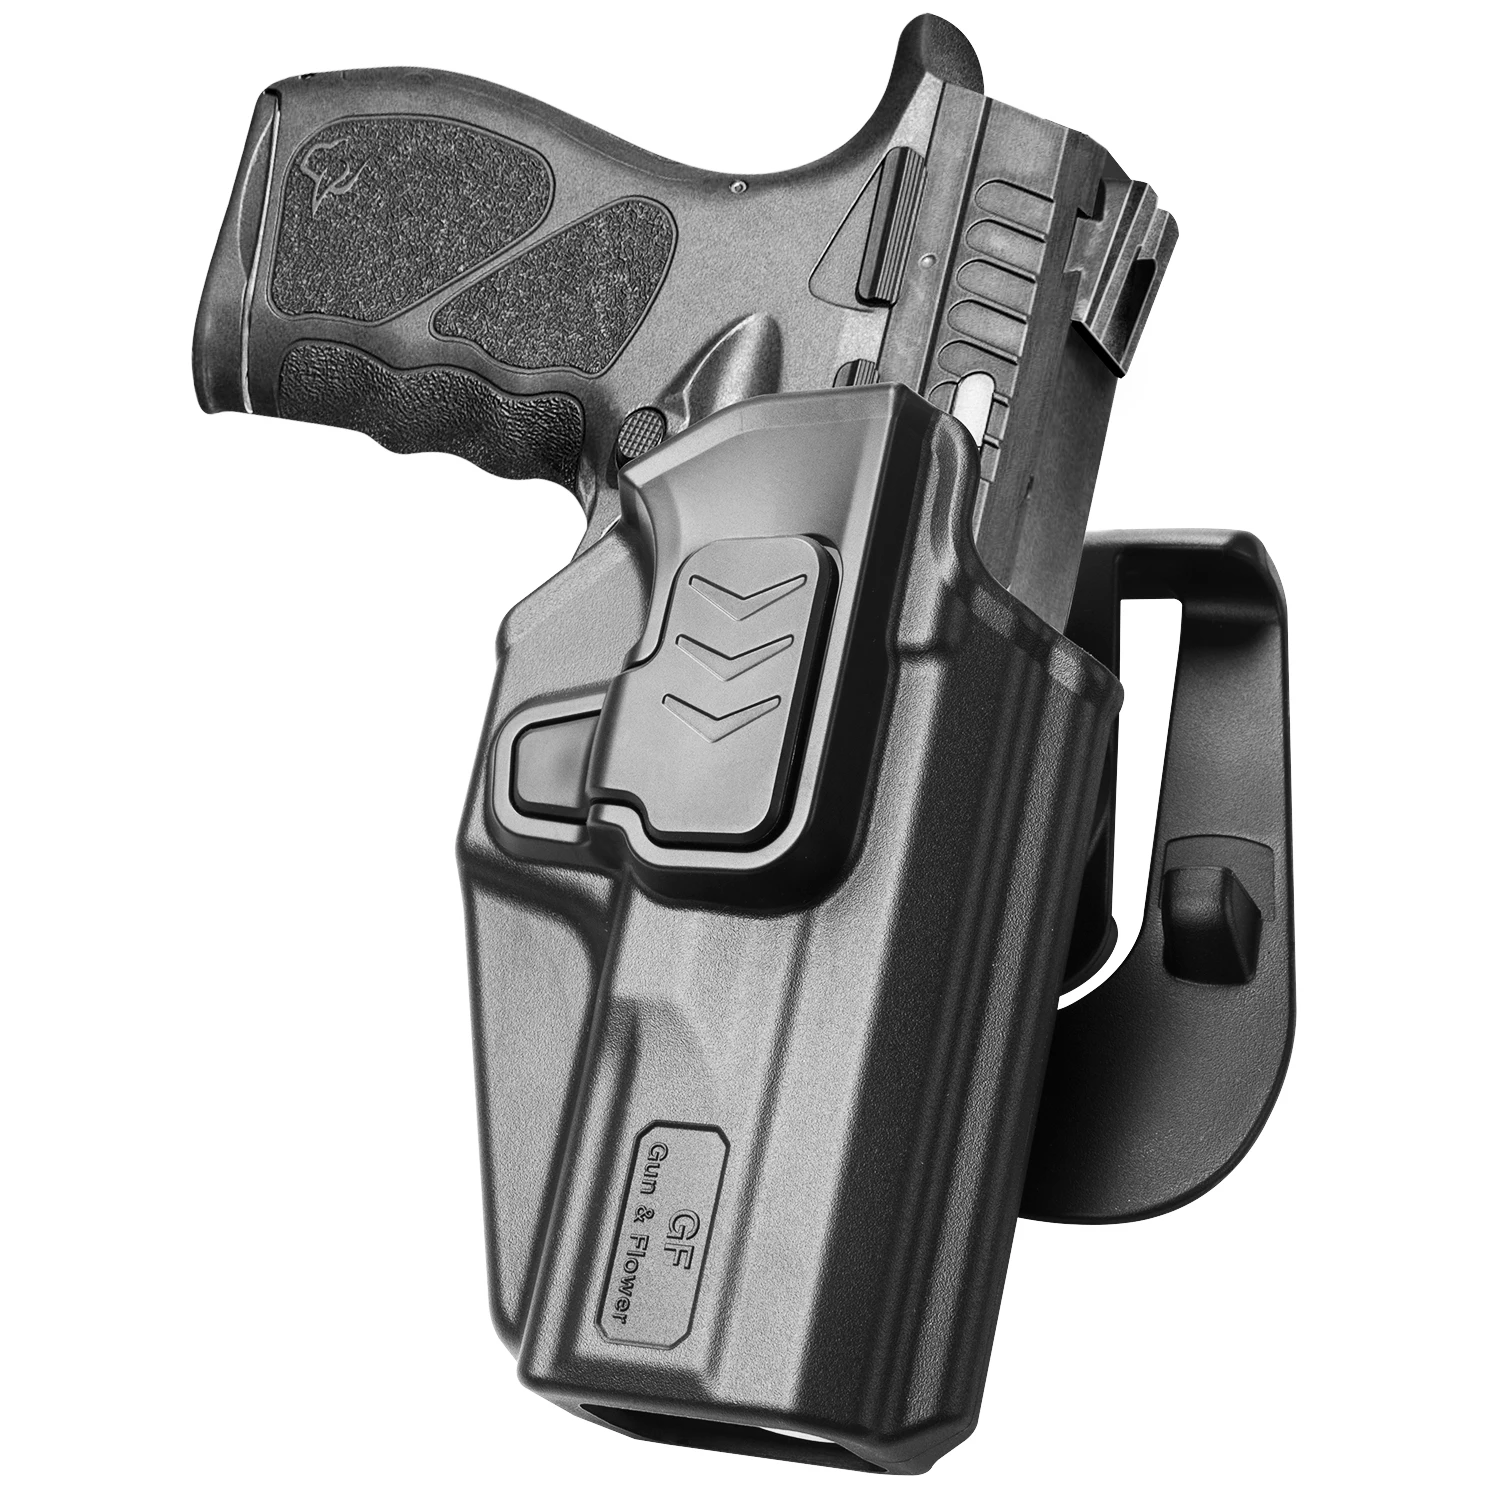 

Holster Fit Taurus TS9, TH 9, G2C/3C OWB Index Release Polymer Holster with Paddle 9mm/.40 Pistol Holder Right Hand Gun&Flower